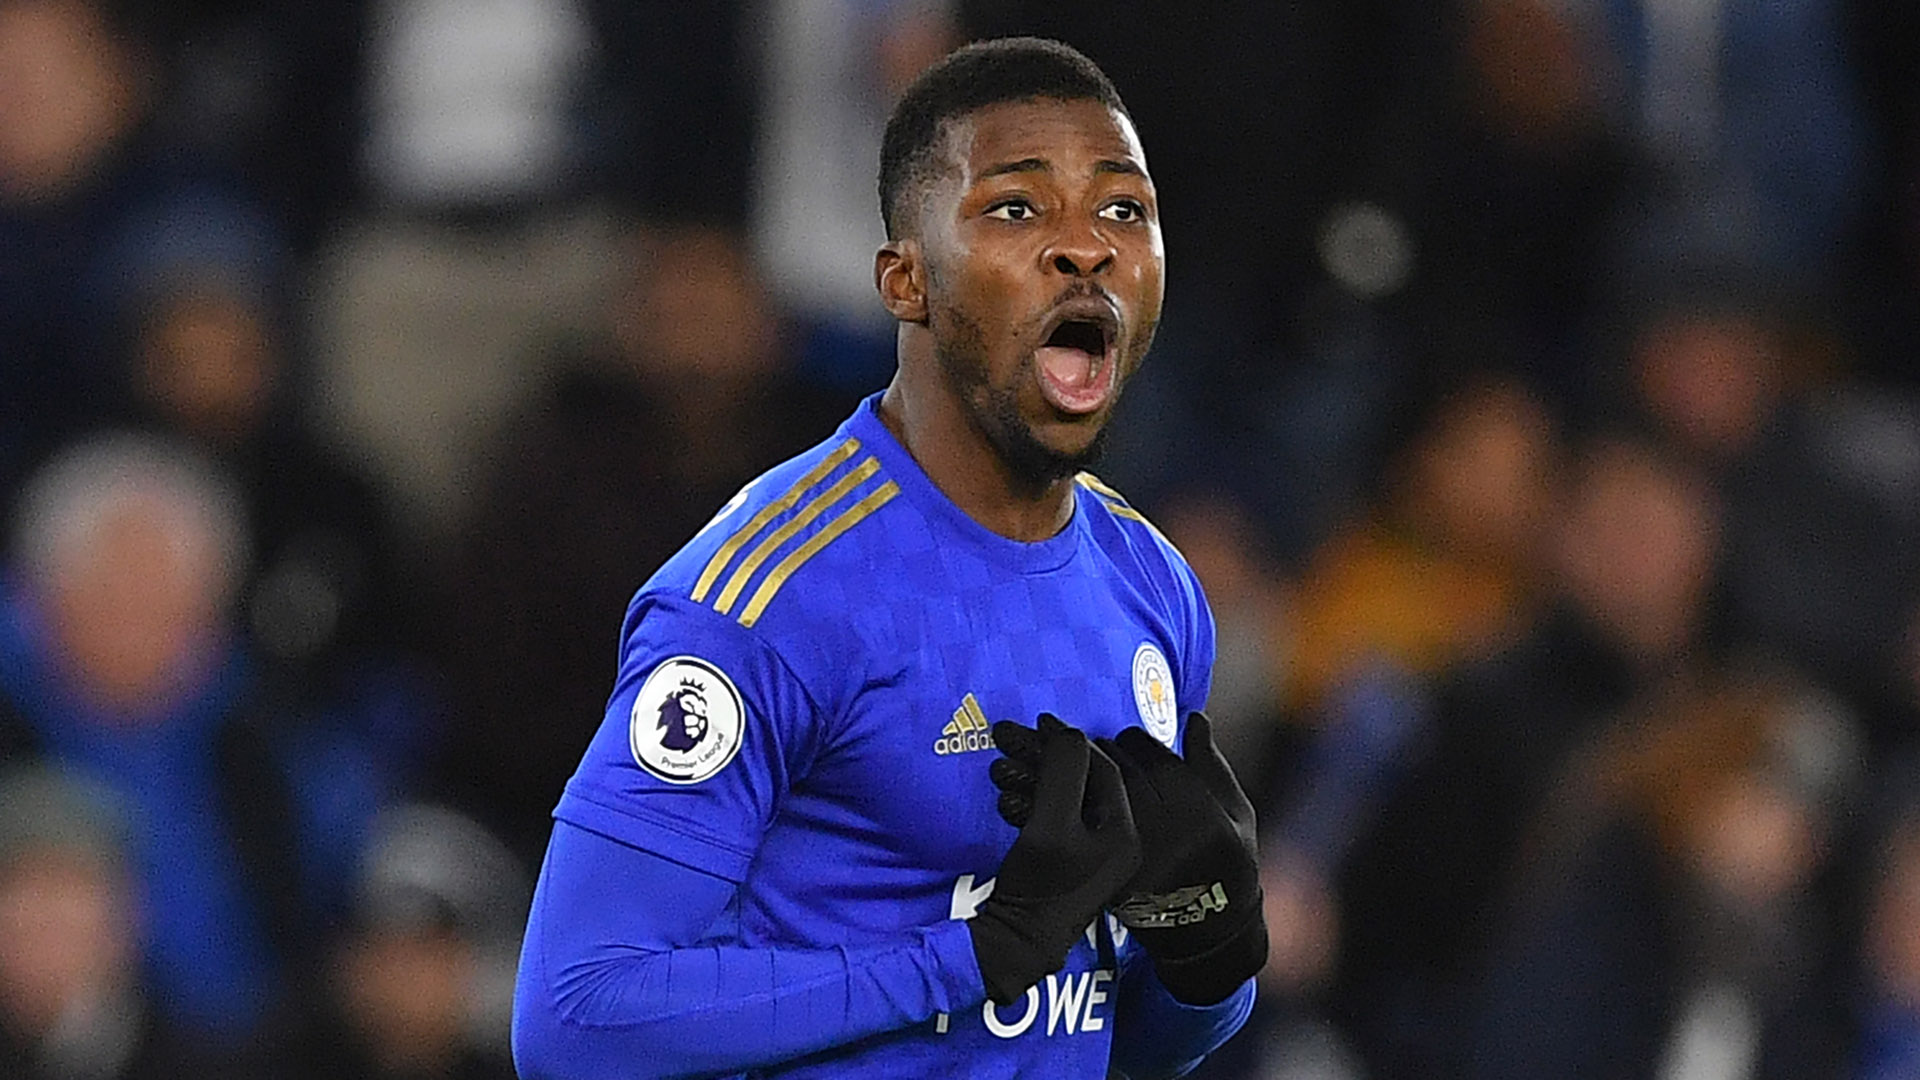 Iheanacho can’t replace Vardy at Leicester City – Heskey